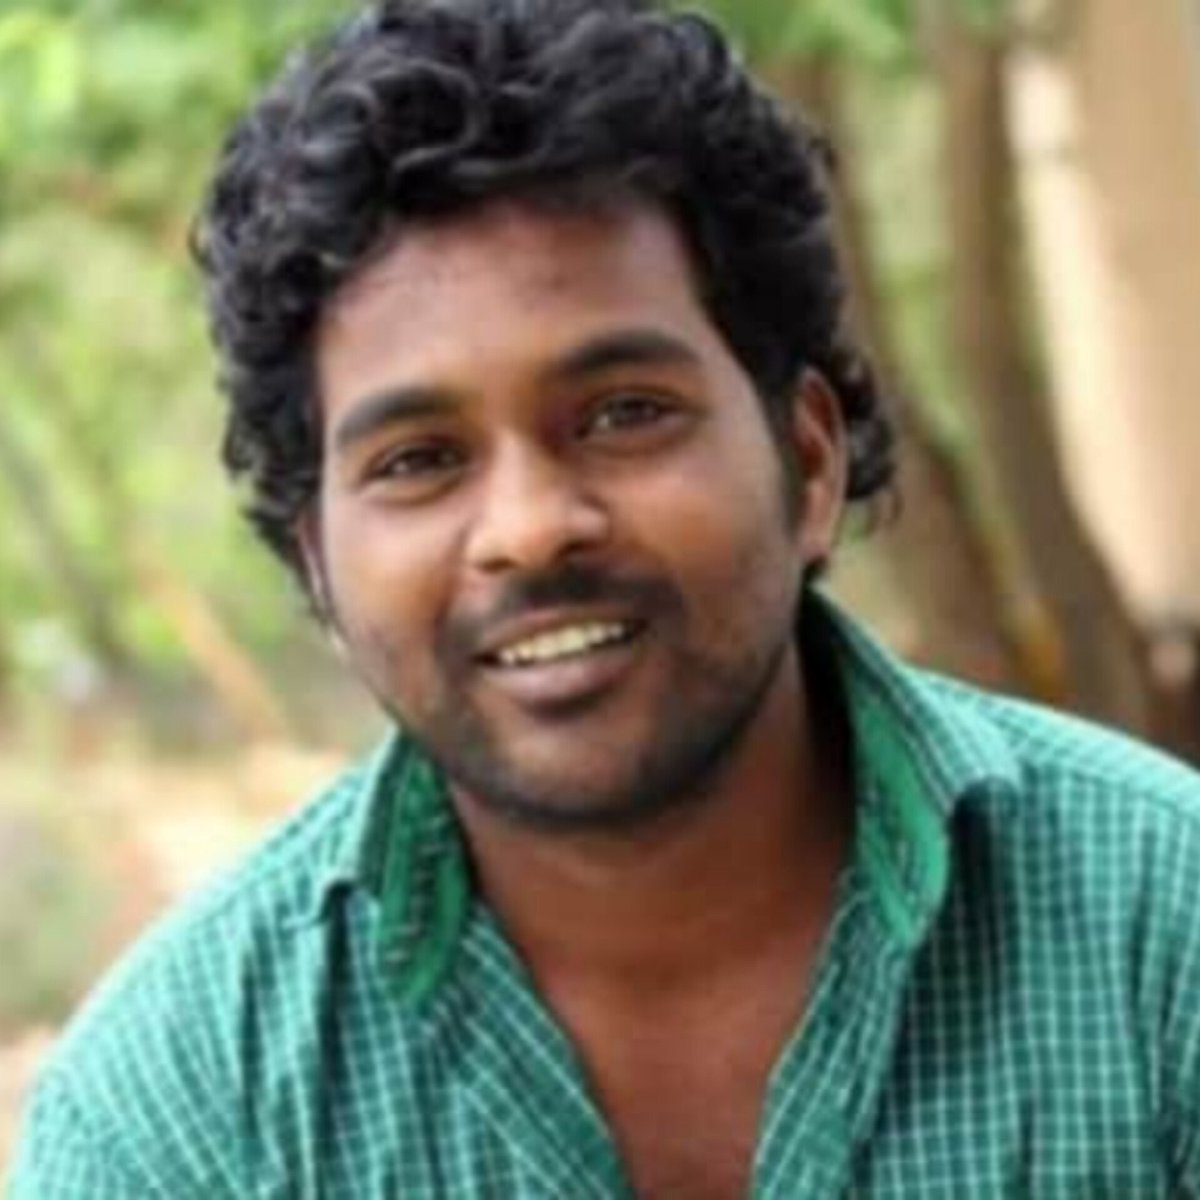 Telangana Police close Rohith Vemula's death case, absolving accused of wrongdoing. Controversy ensues as family disputes findings. 

Read more on shorts91.com/category/india

#RohithVemula #TelanganaPolice #Justice #DalitRights